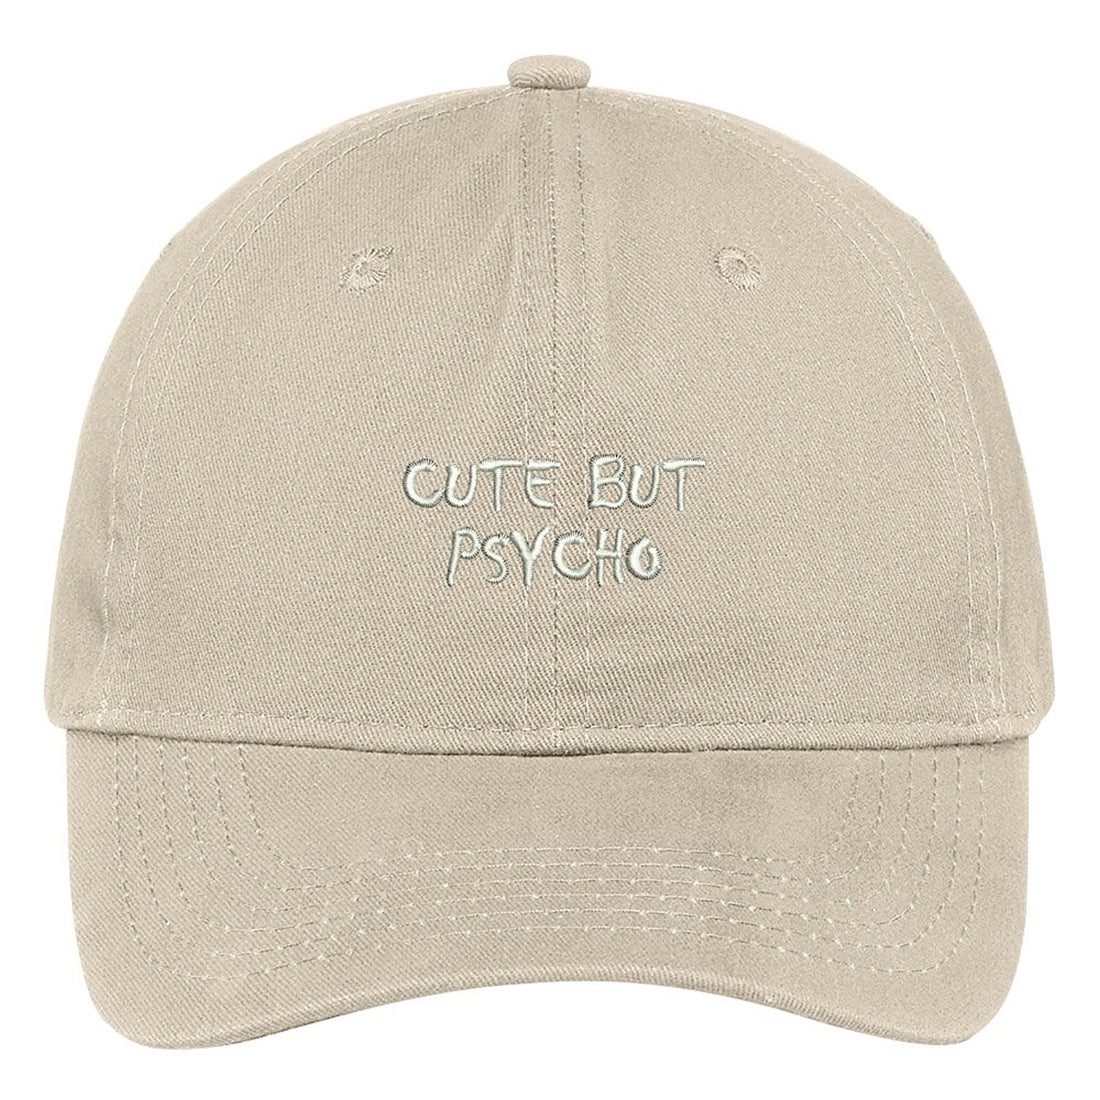 Trendy Apparel Shop Cute But Psycho Small Embroidered Adjustable Cotton Cap